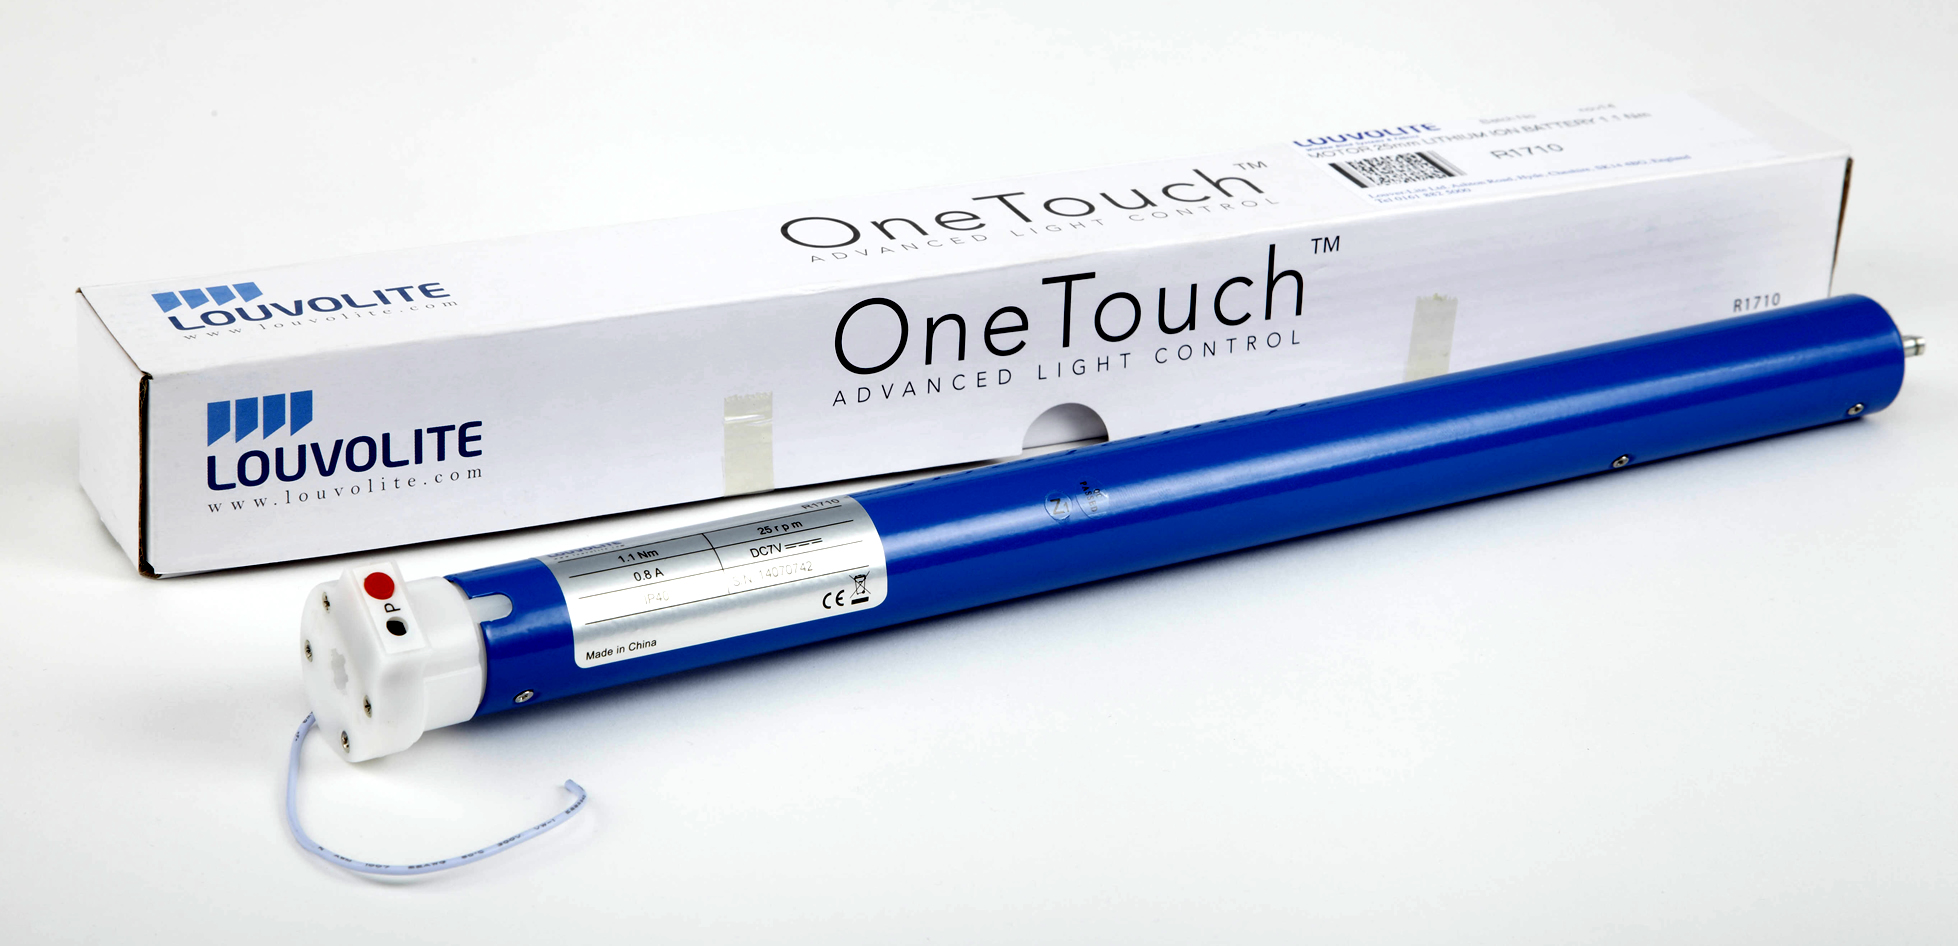 One Touch advanced blind remote control